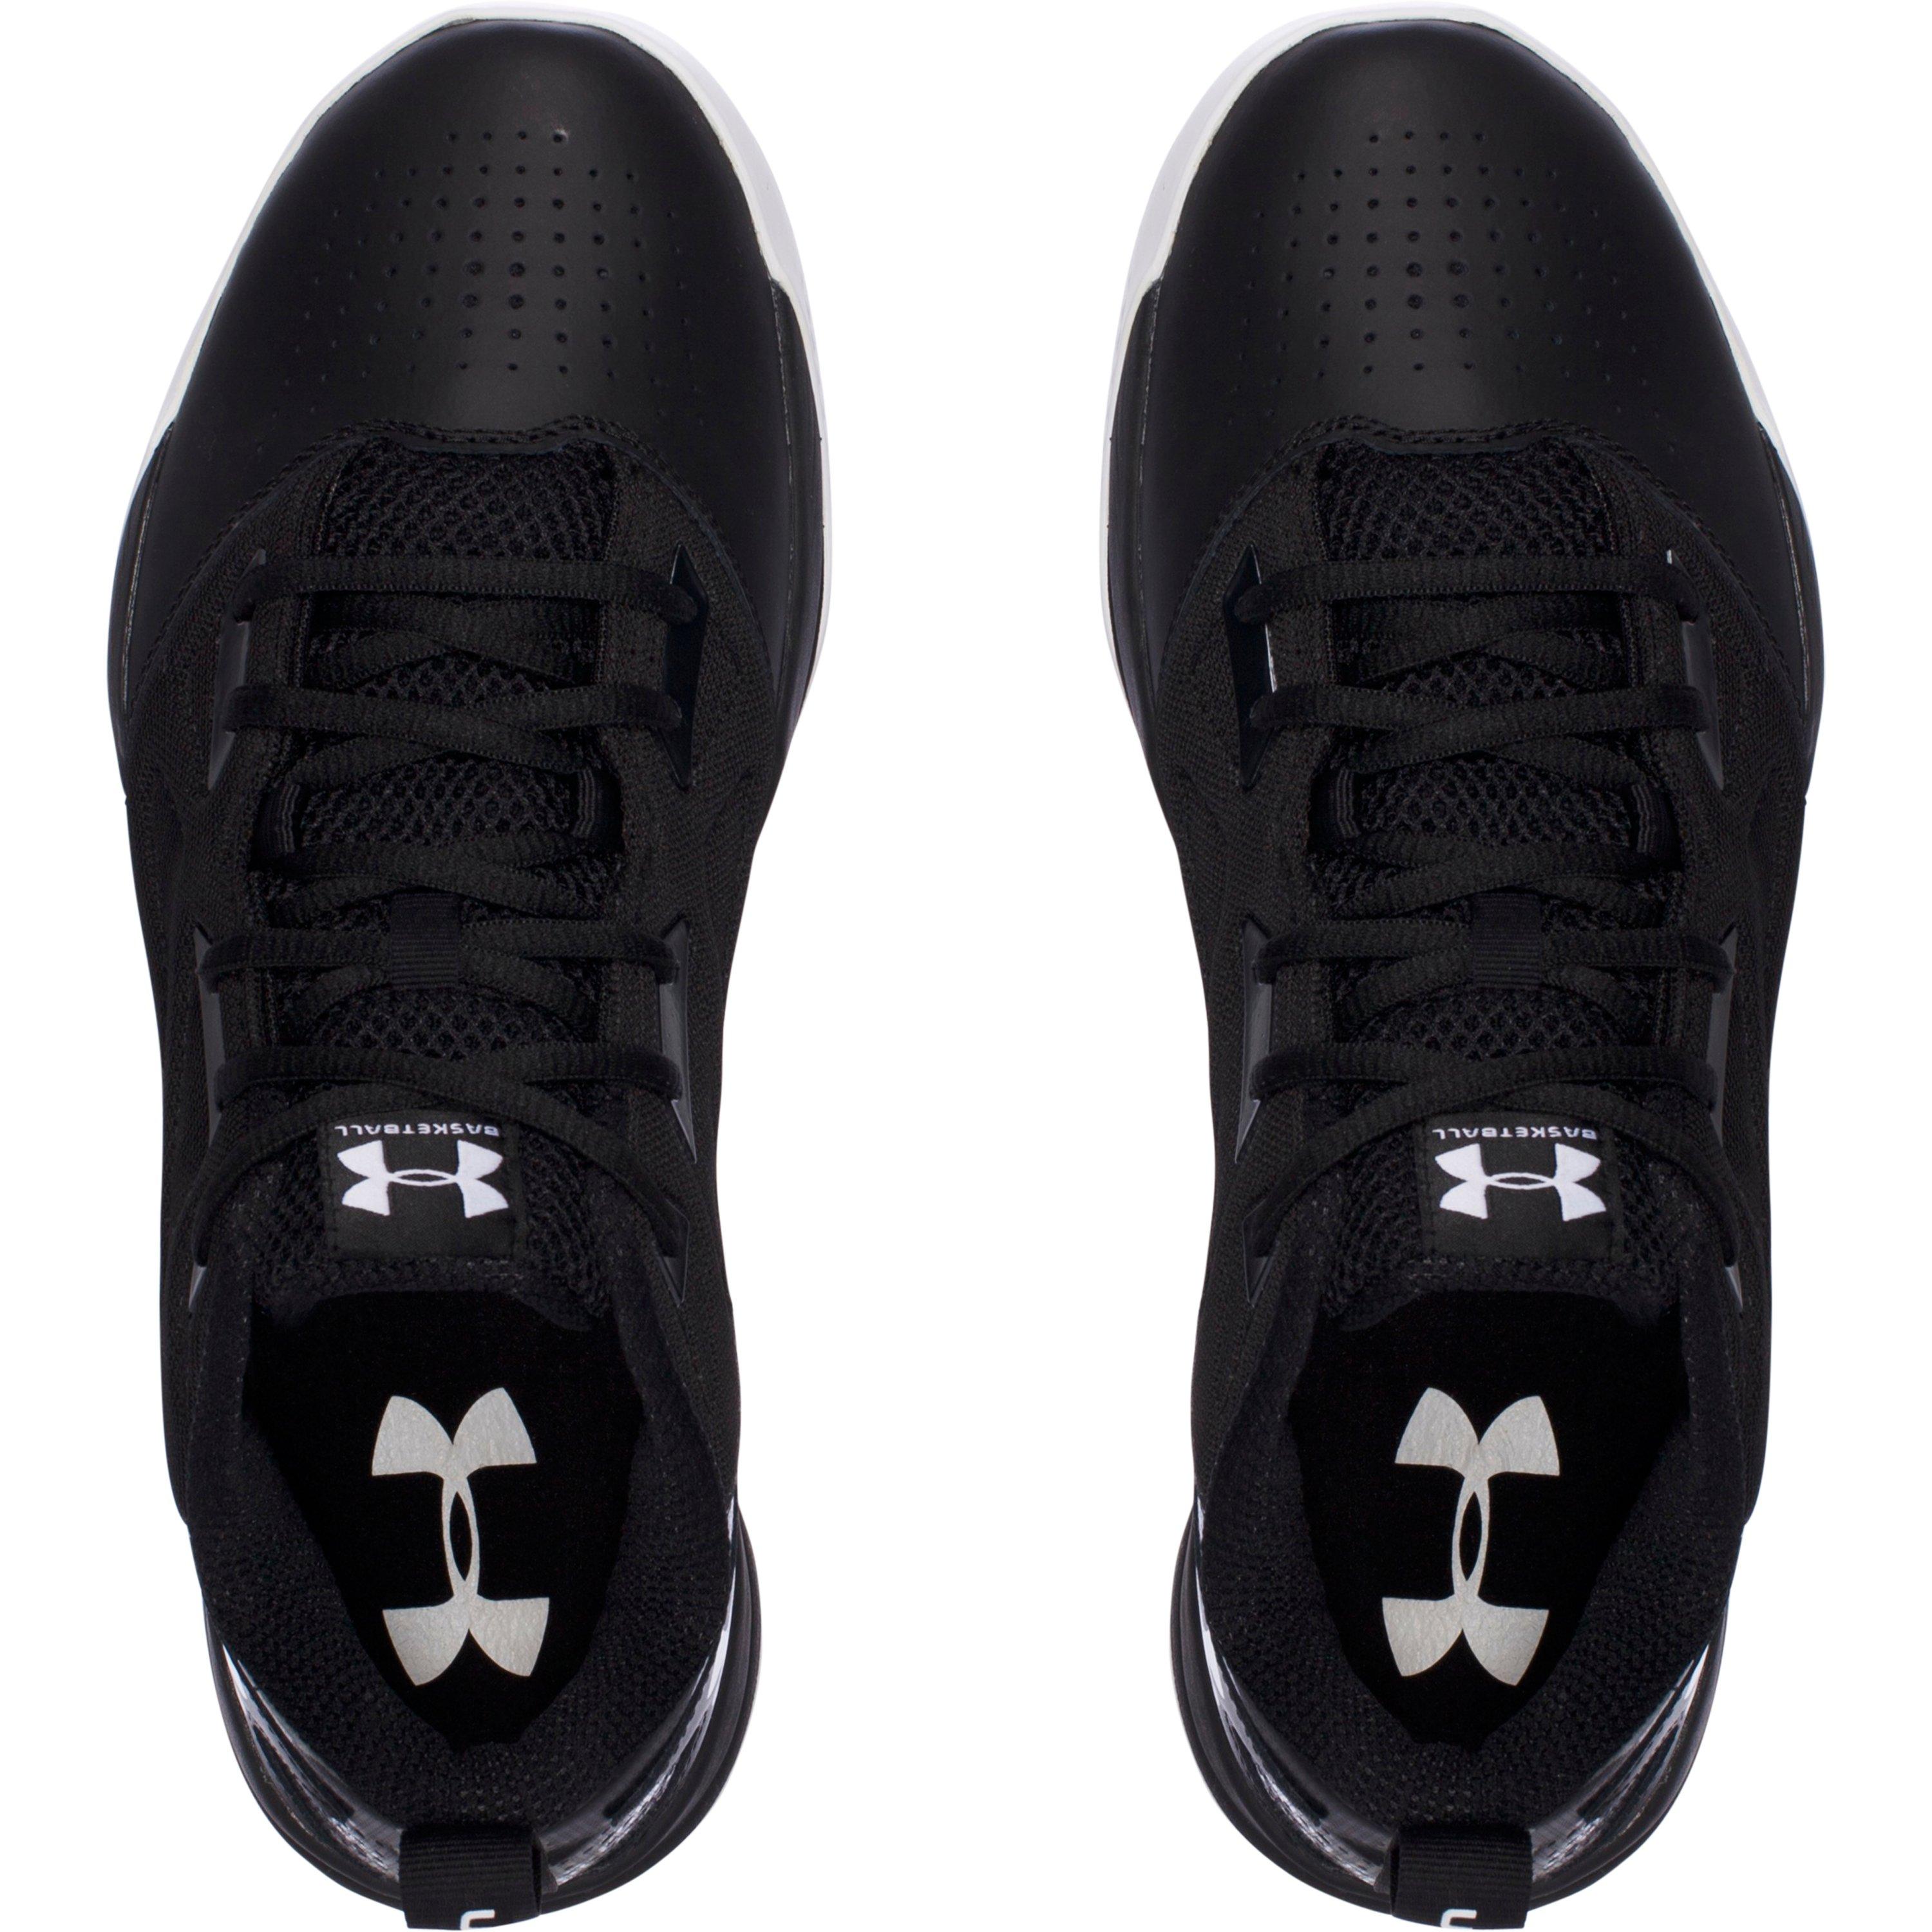 Under Armour Synthetic Men's Ua Jet Low Basketball Shoes in Black ...